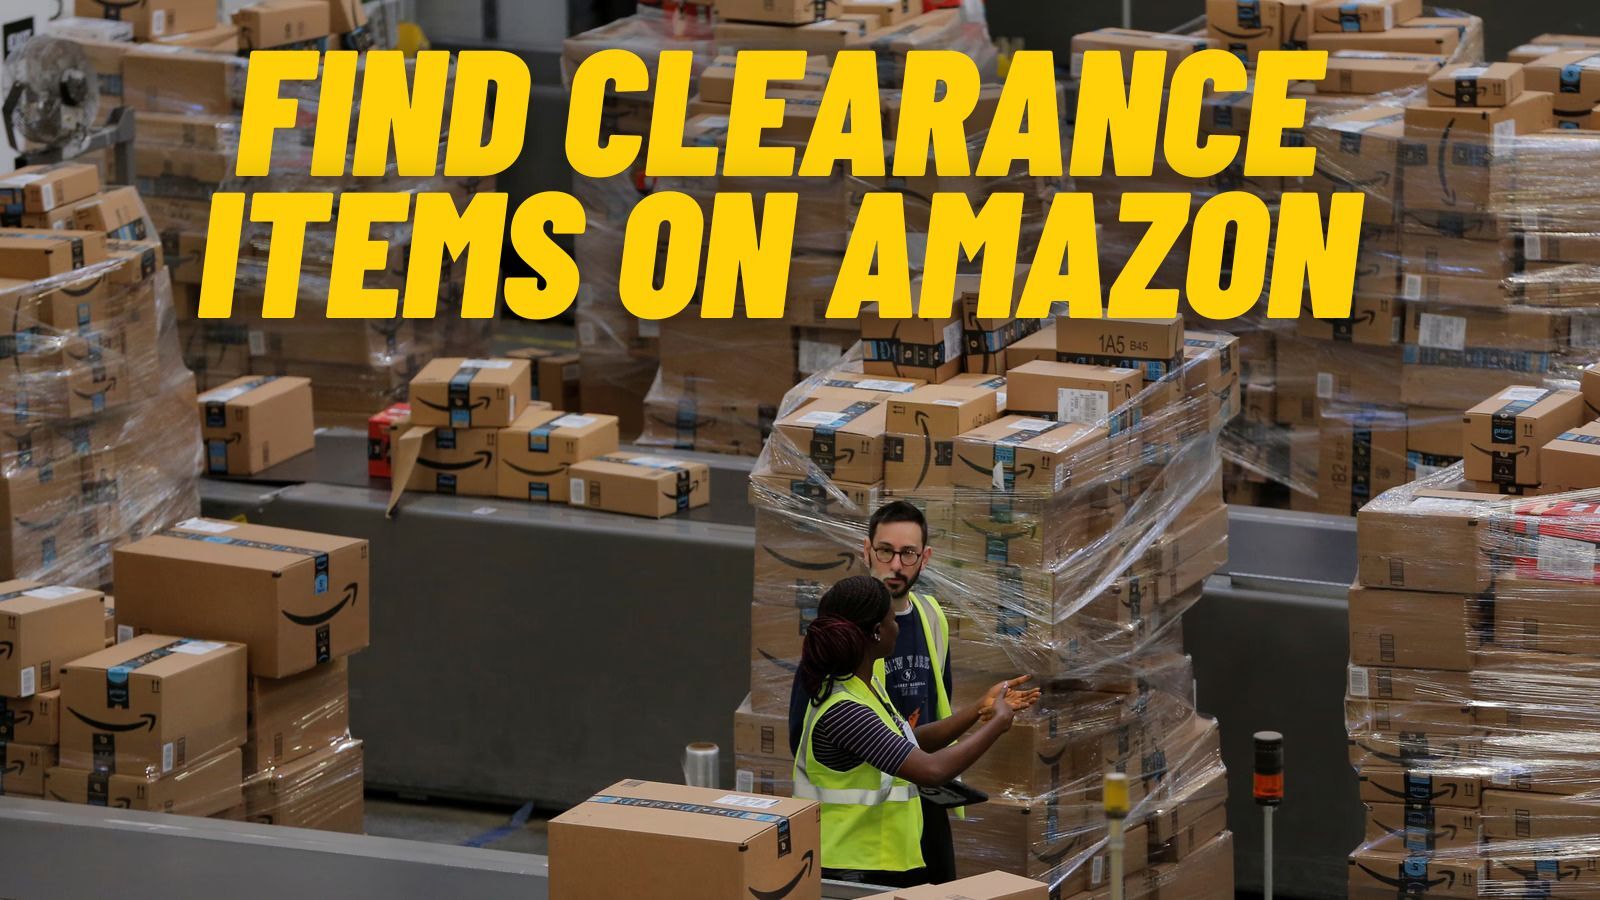 How to Find Clearance Items on Amazon? 